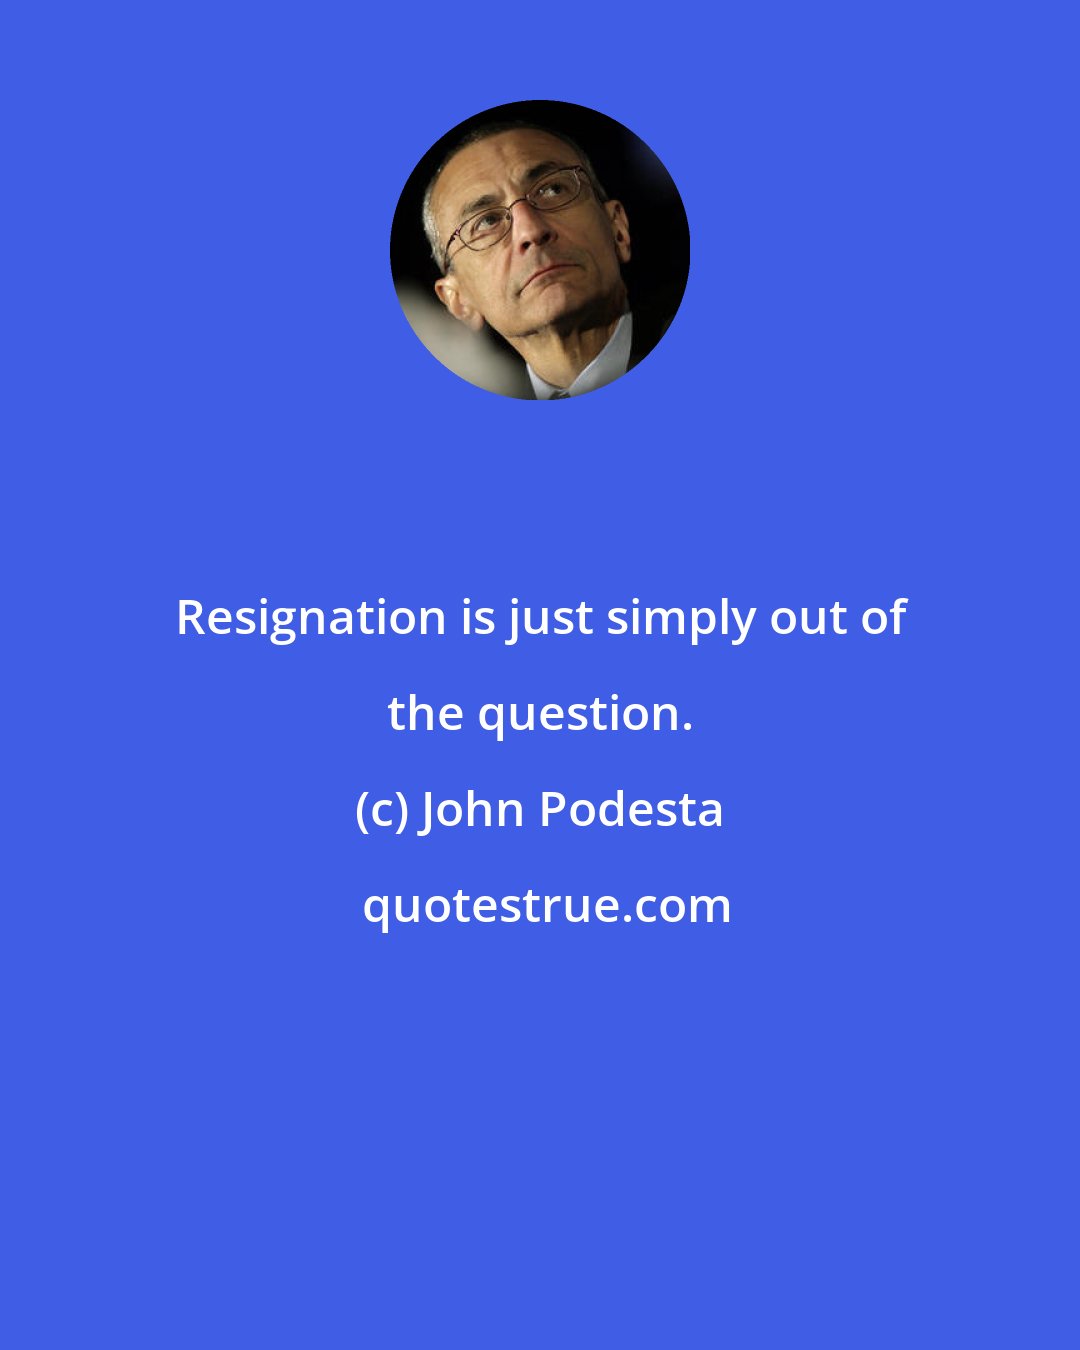 John Podesta: Resignation is just simply out of the question.